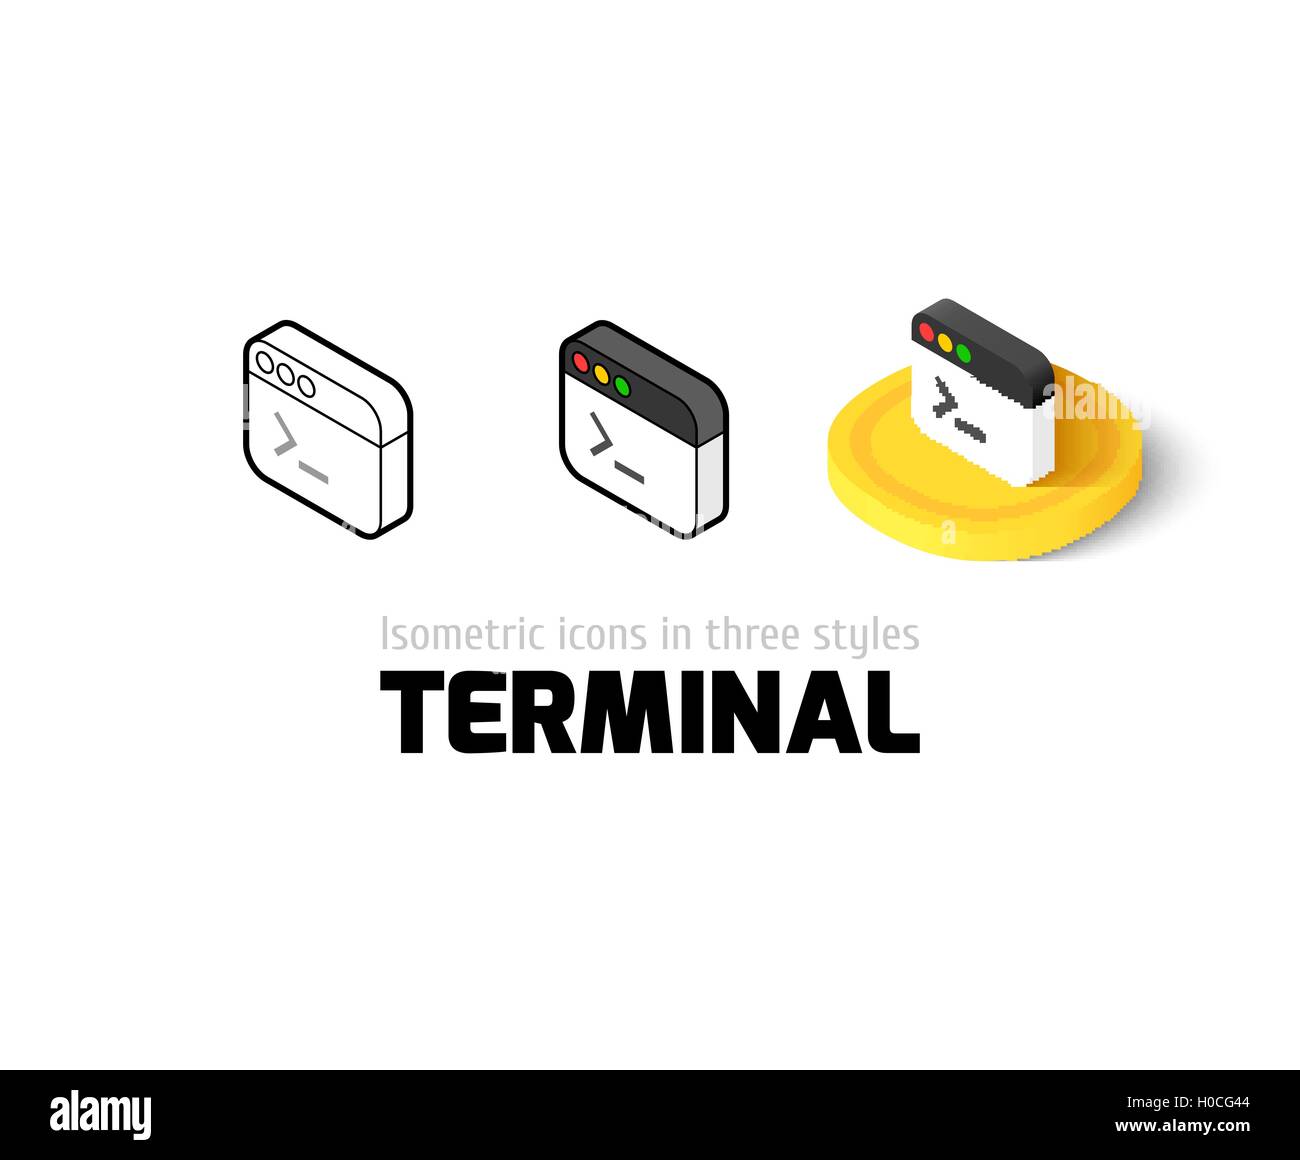 Terminal icon in different style Stock Vector